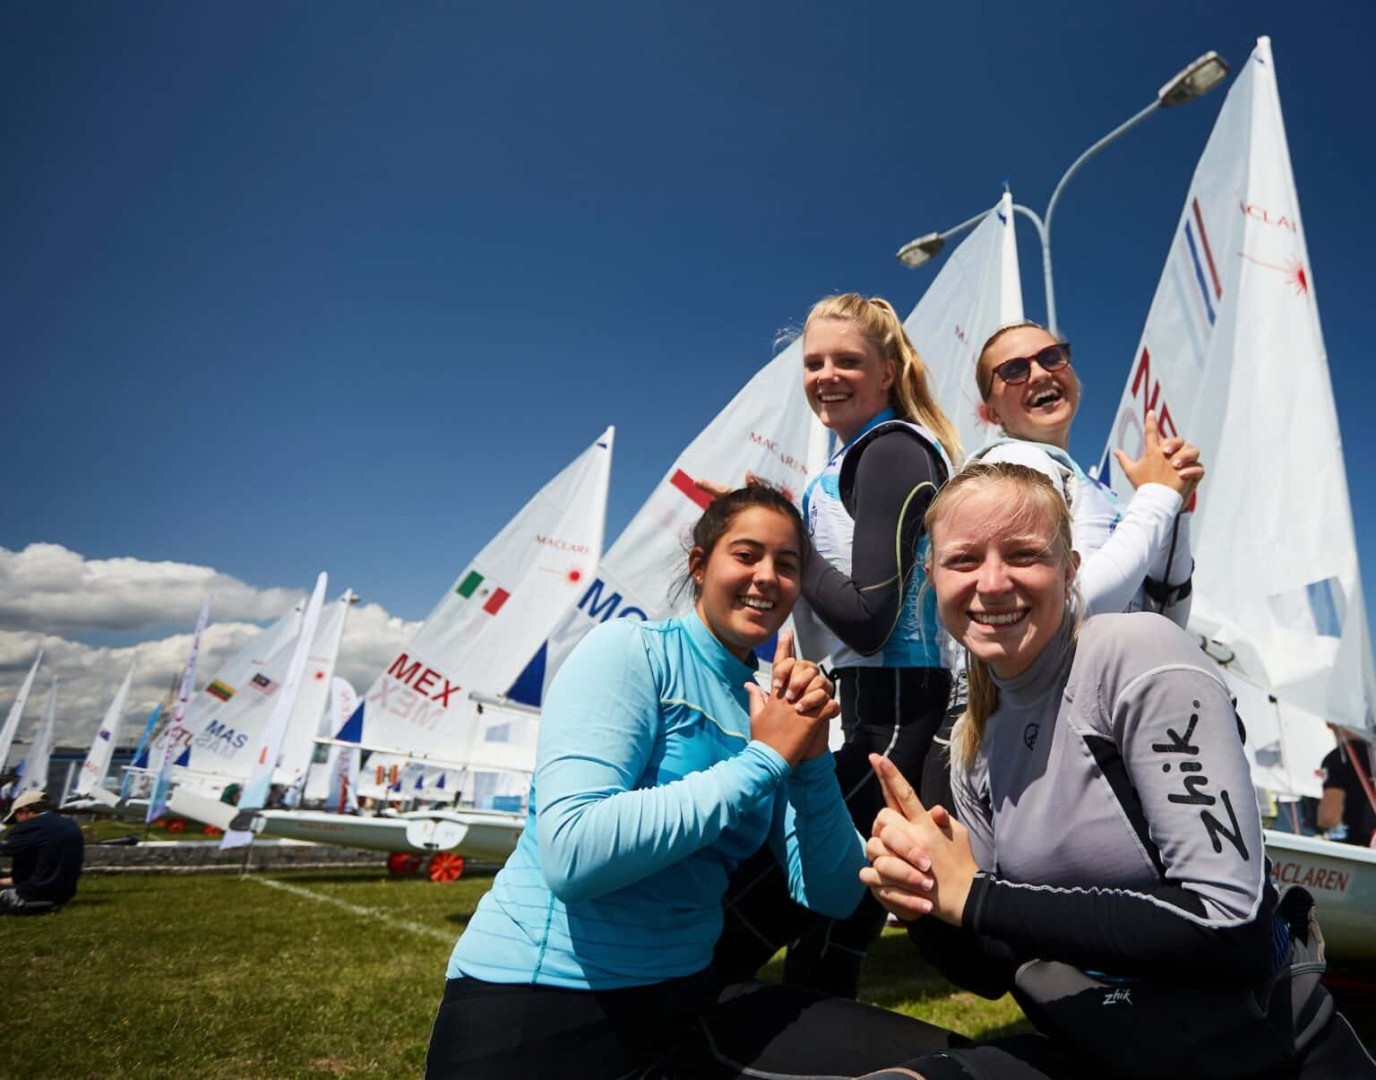 World Sailing supports the IOC’s Let’s Move campaign